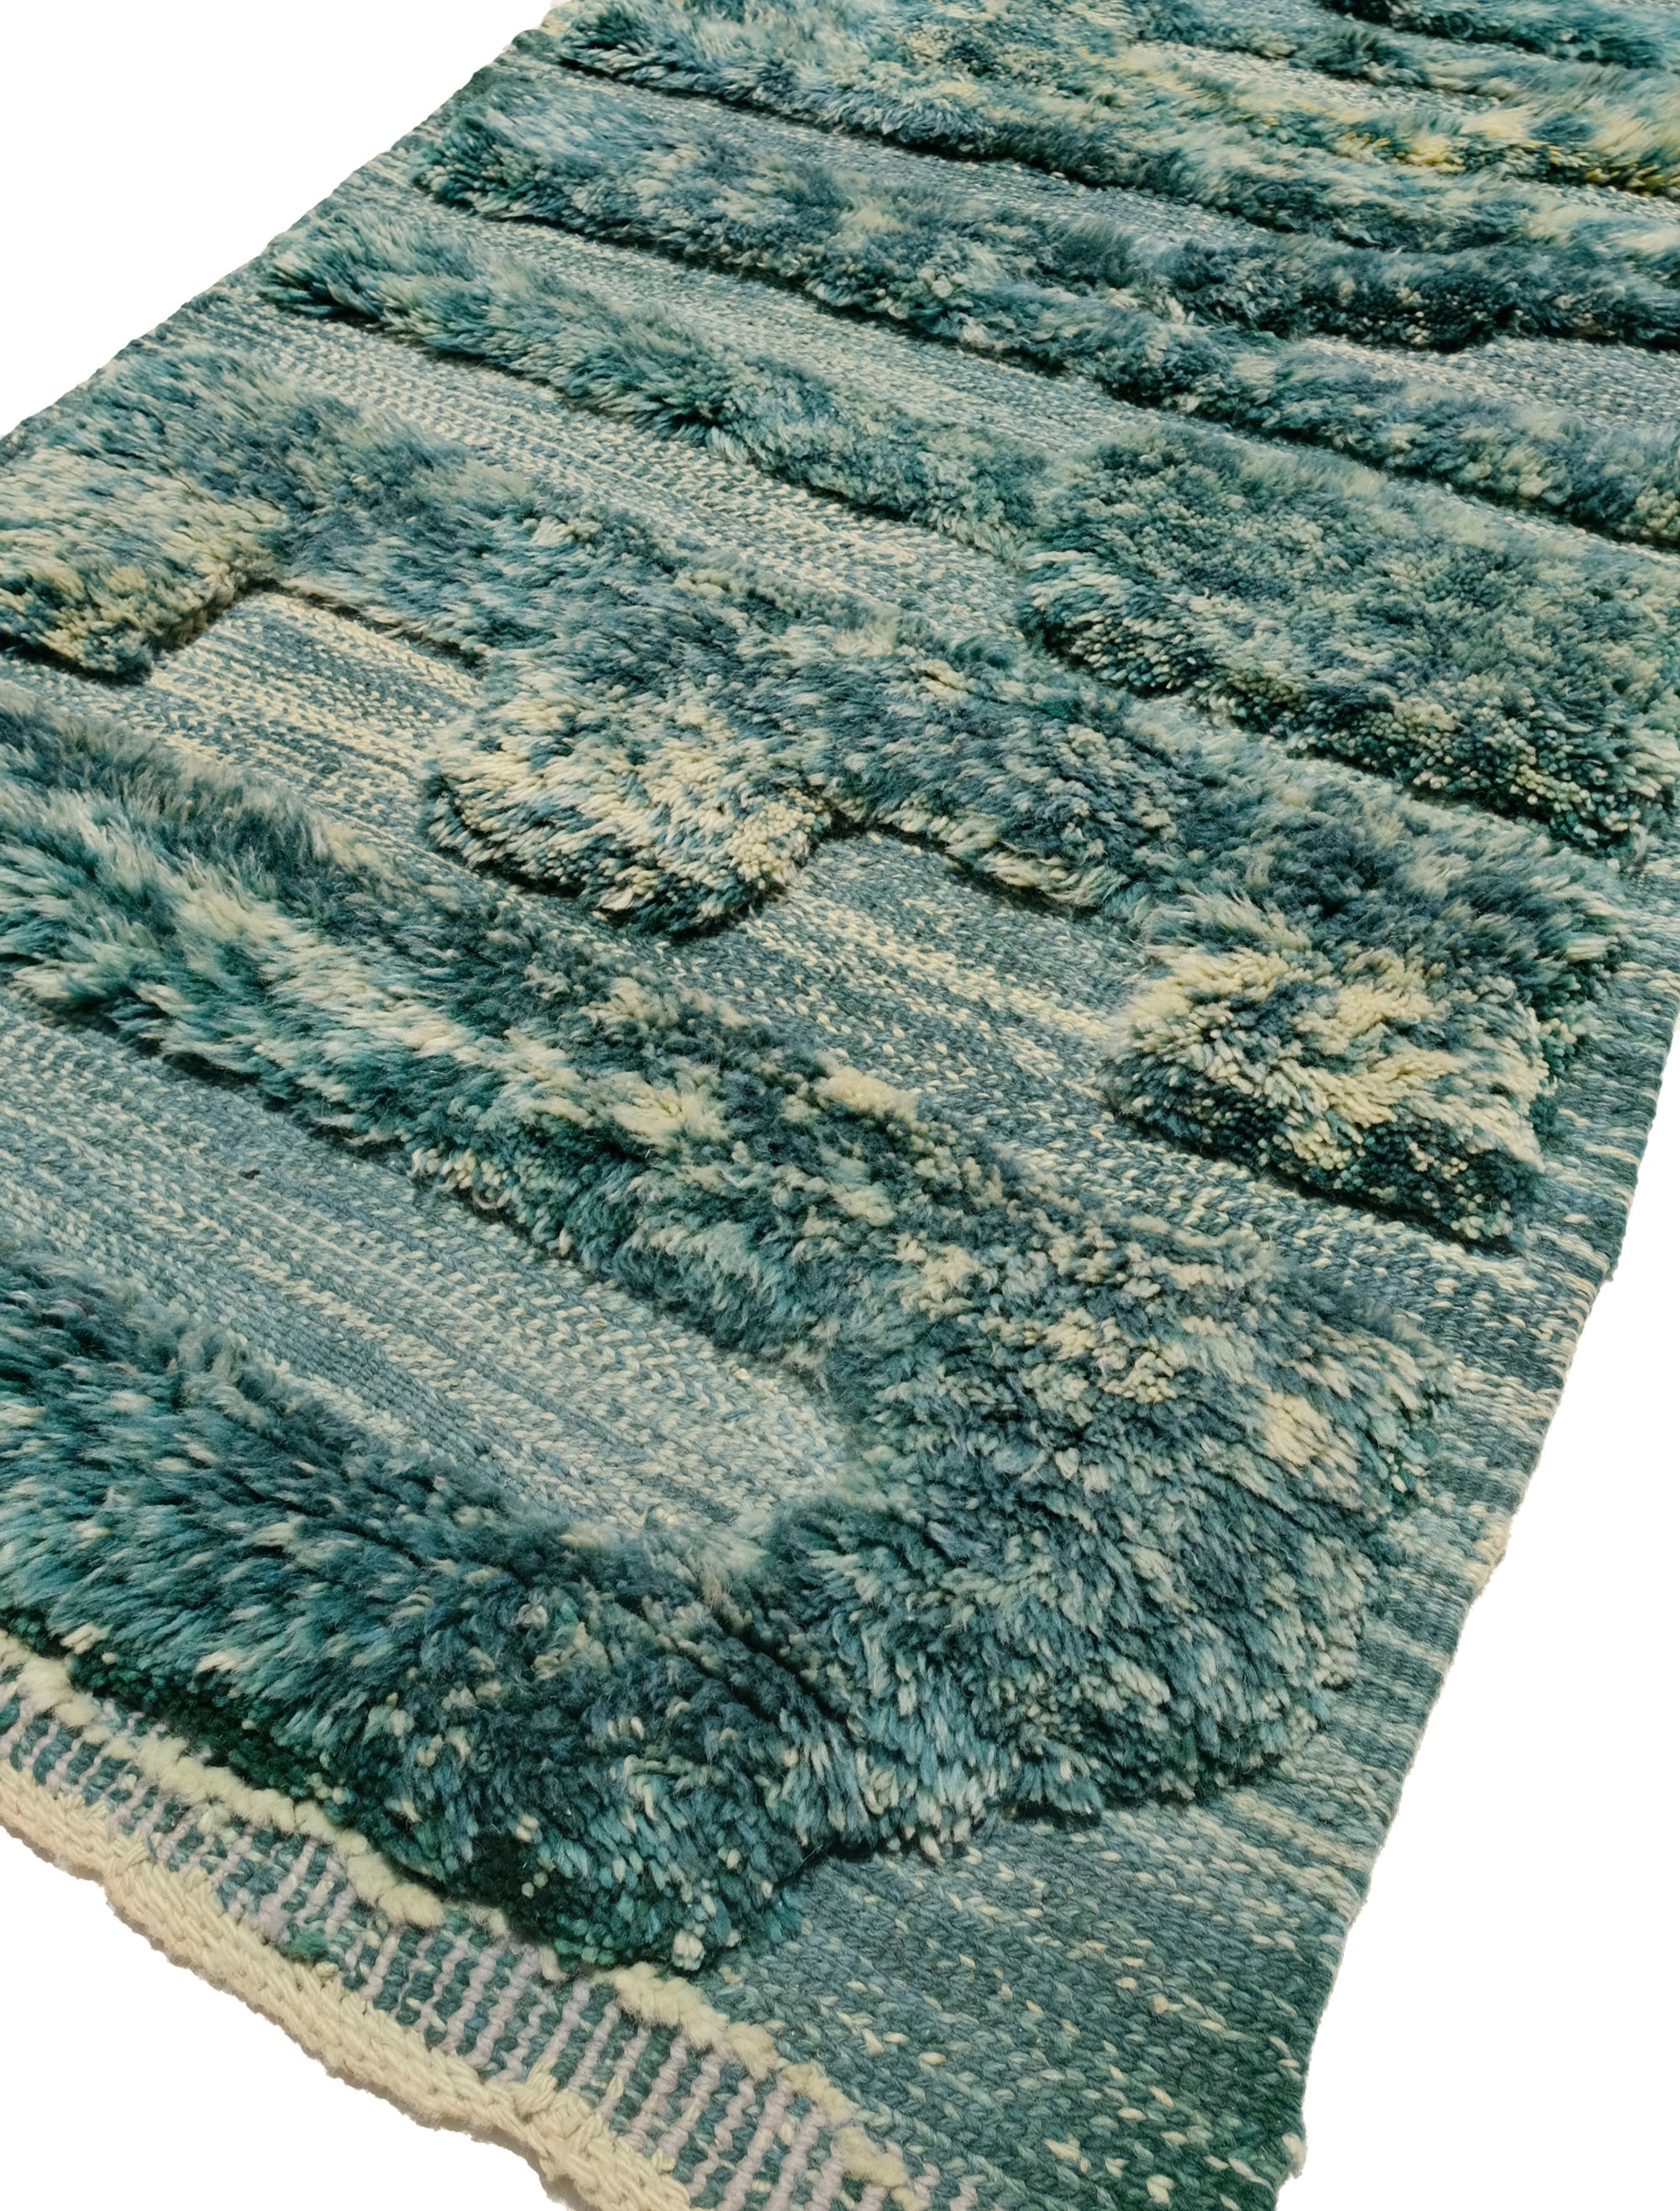 "Verdant Whispers Wanted Rug" – lush greens and an intriguing message woven with a playful touch. Perfect for adding a unique, contemporary element to your space.